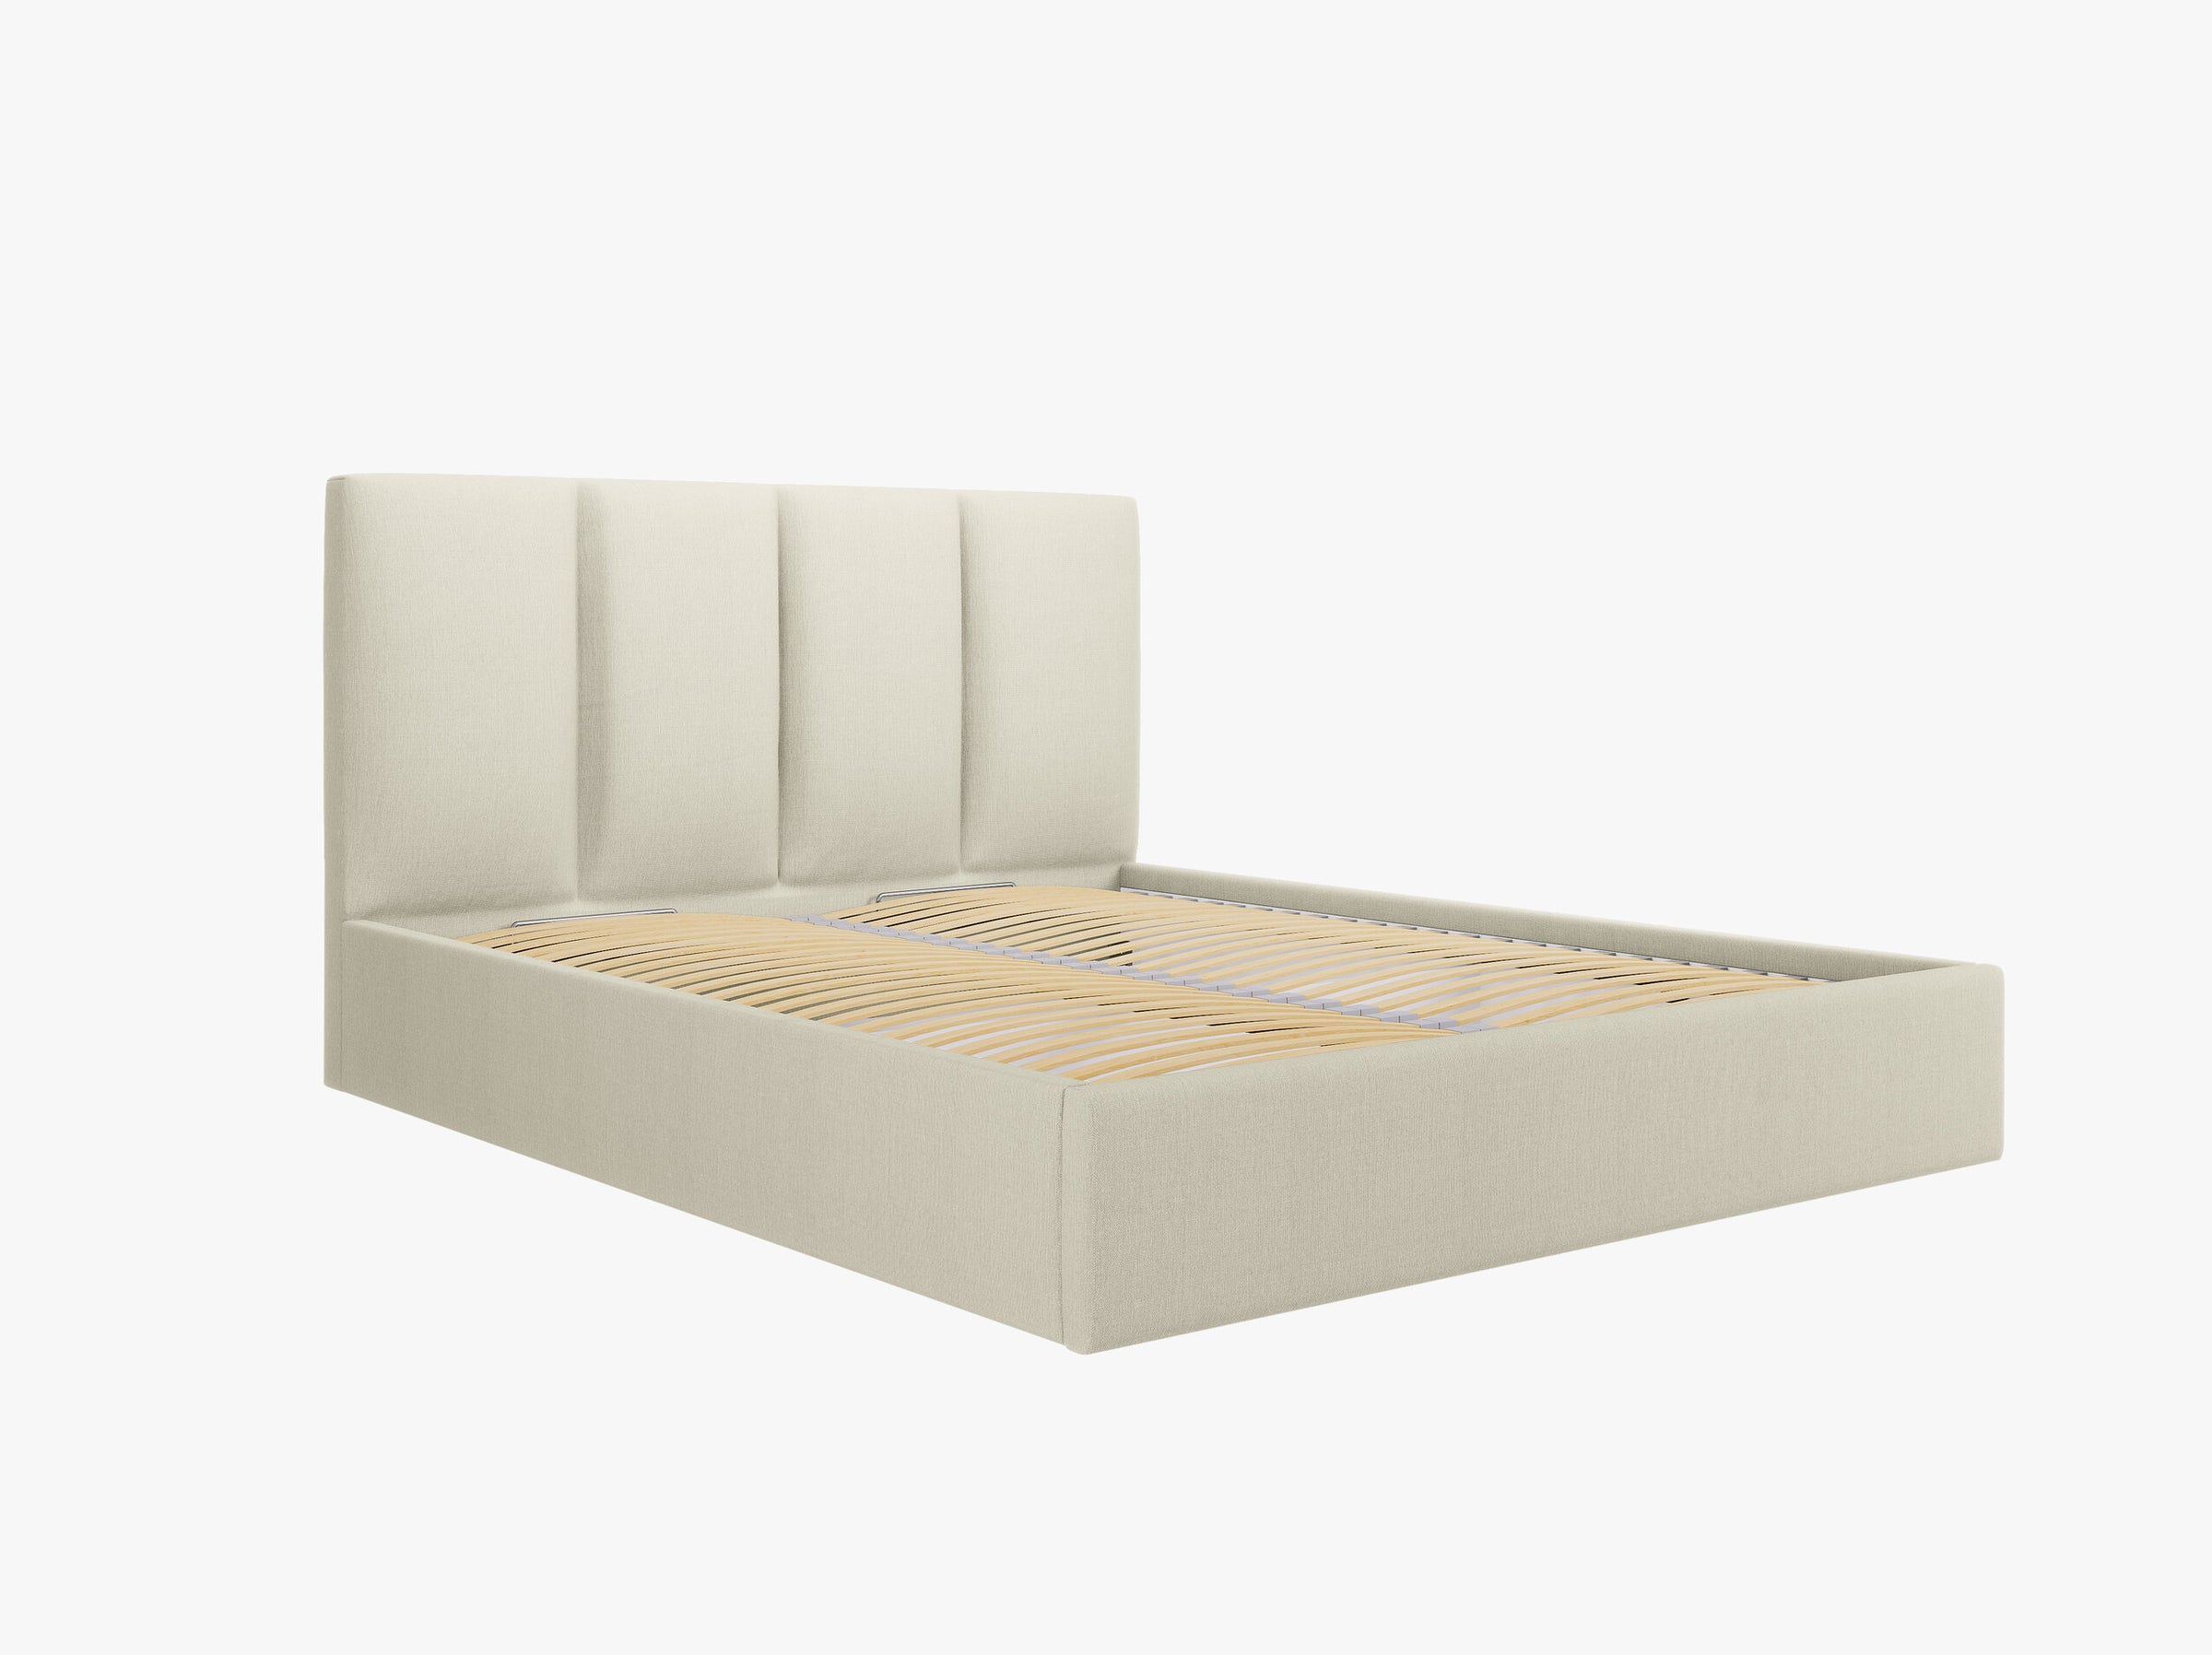 Pyla beds & mattresses structured fabric beige